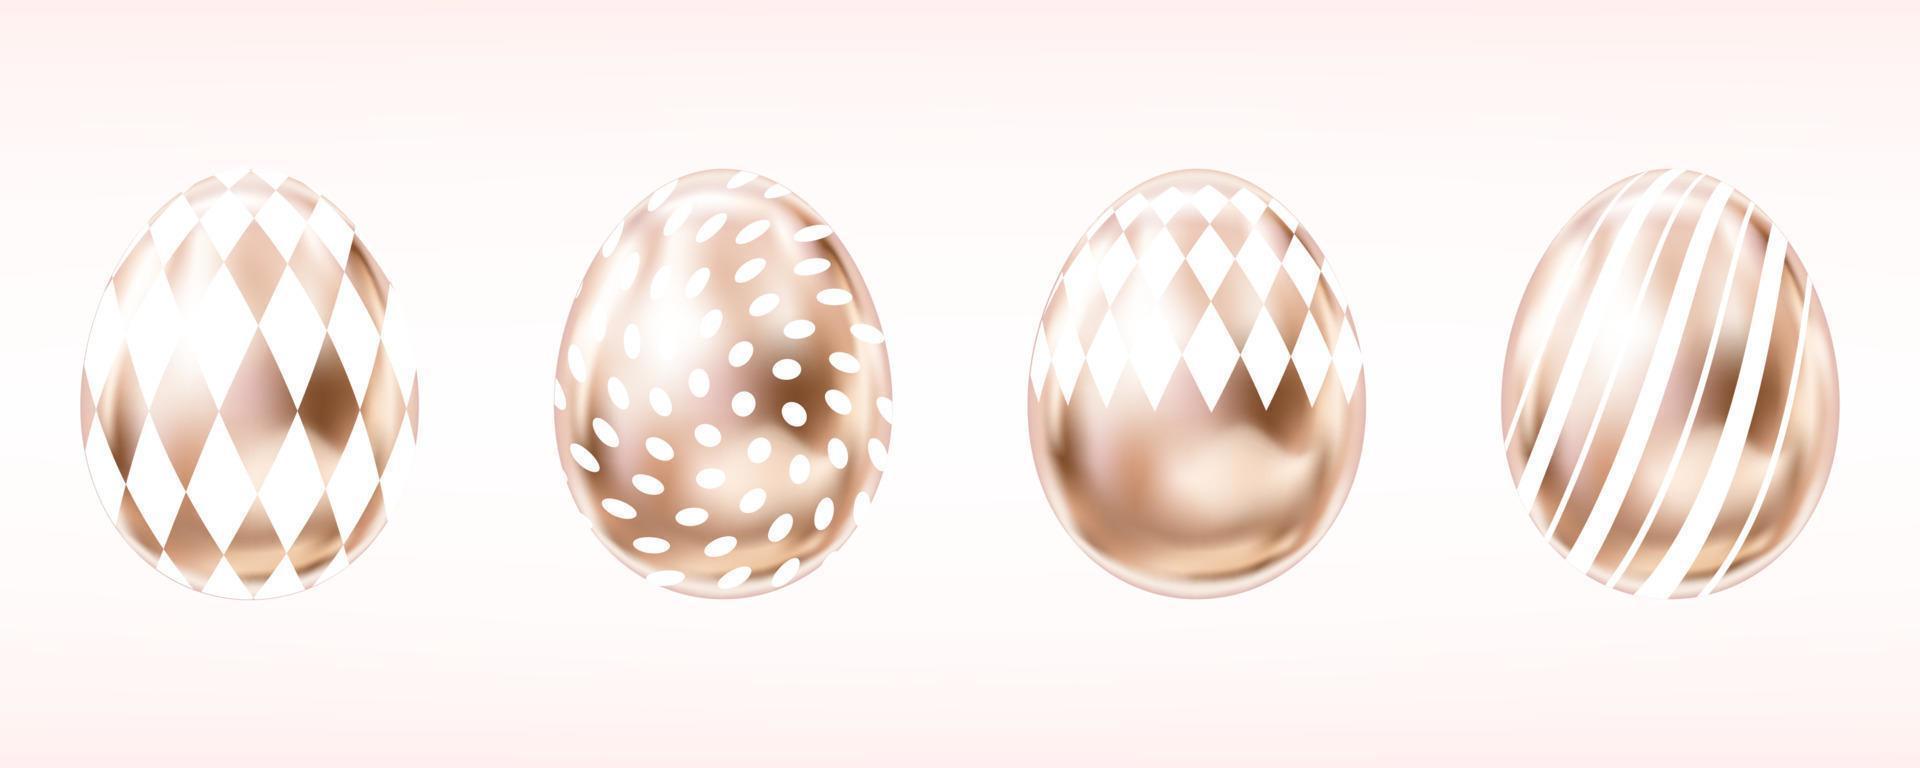 Four glance metallic eggs in pink color with white dots, rumb and stripes. Isolated objects for Easter decoration vector